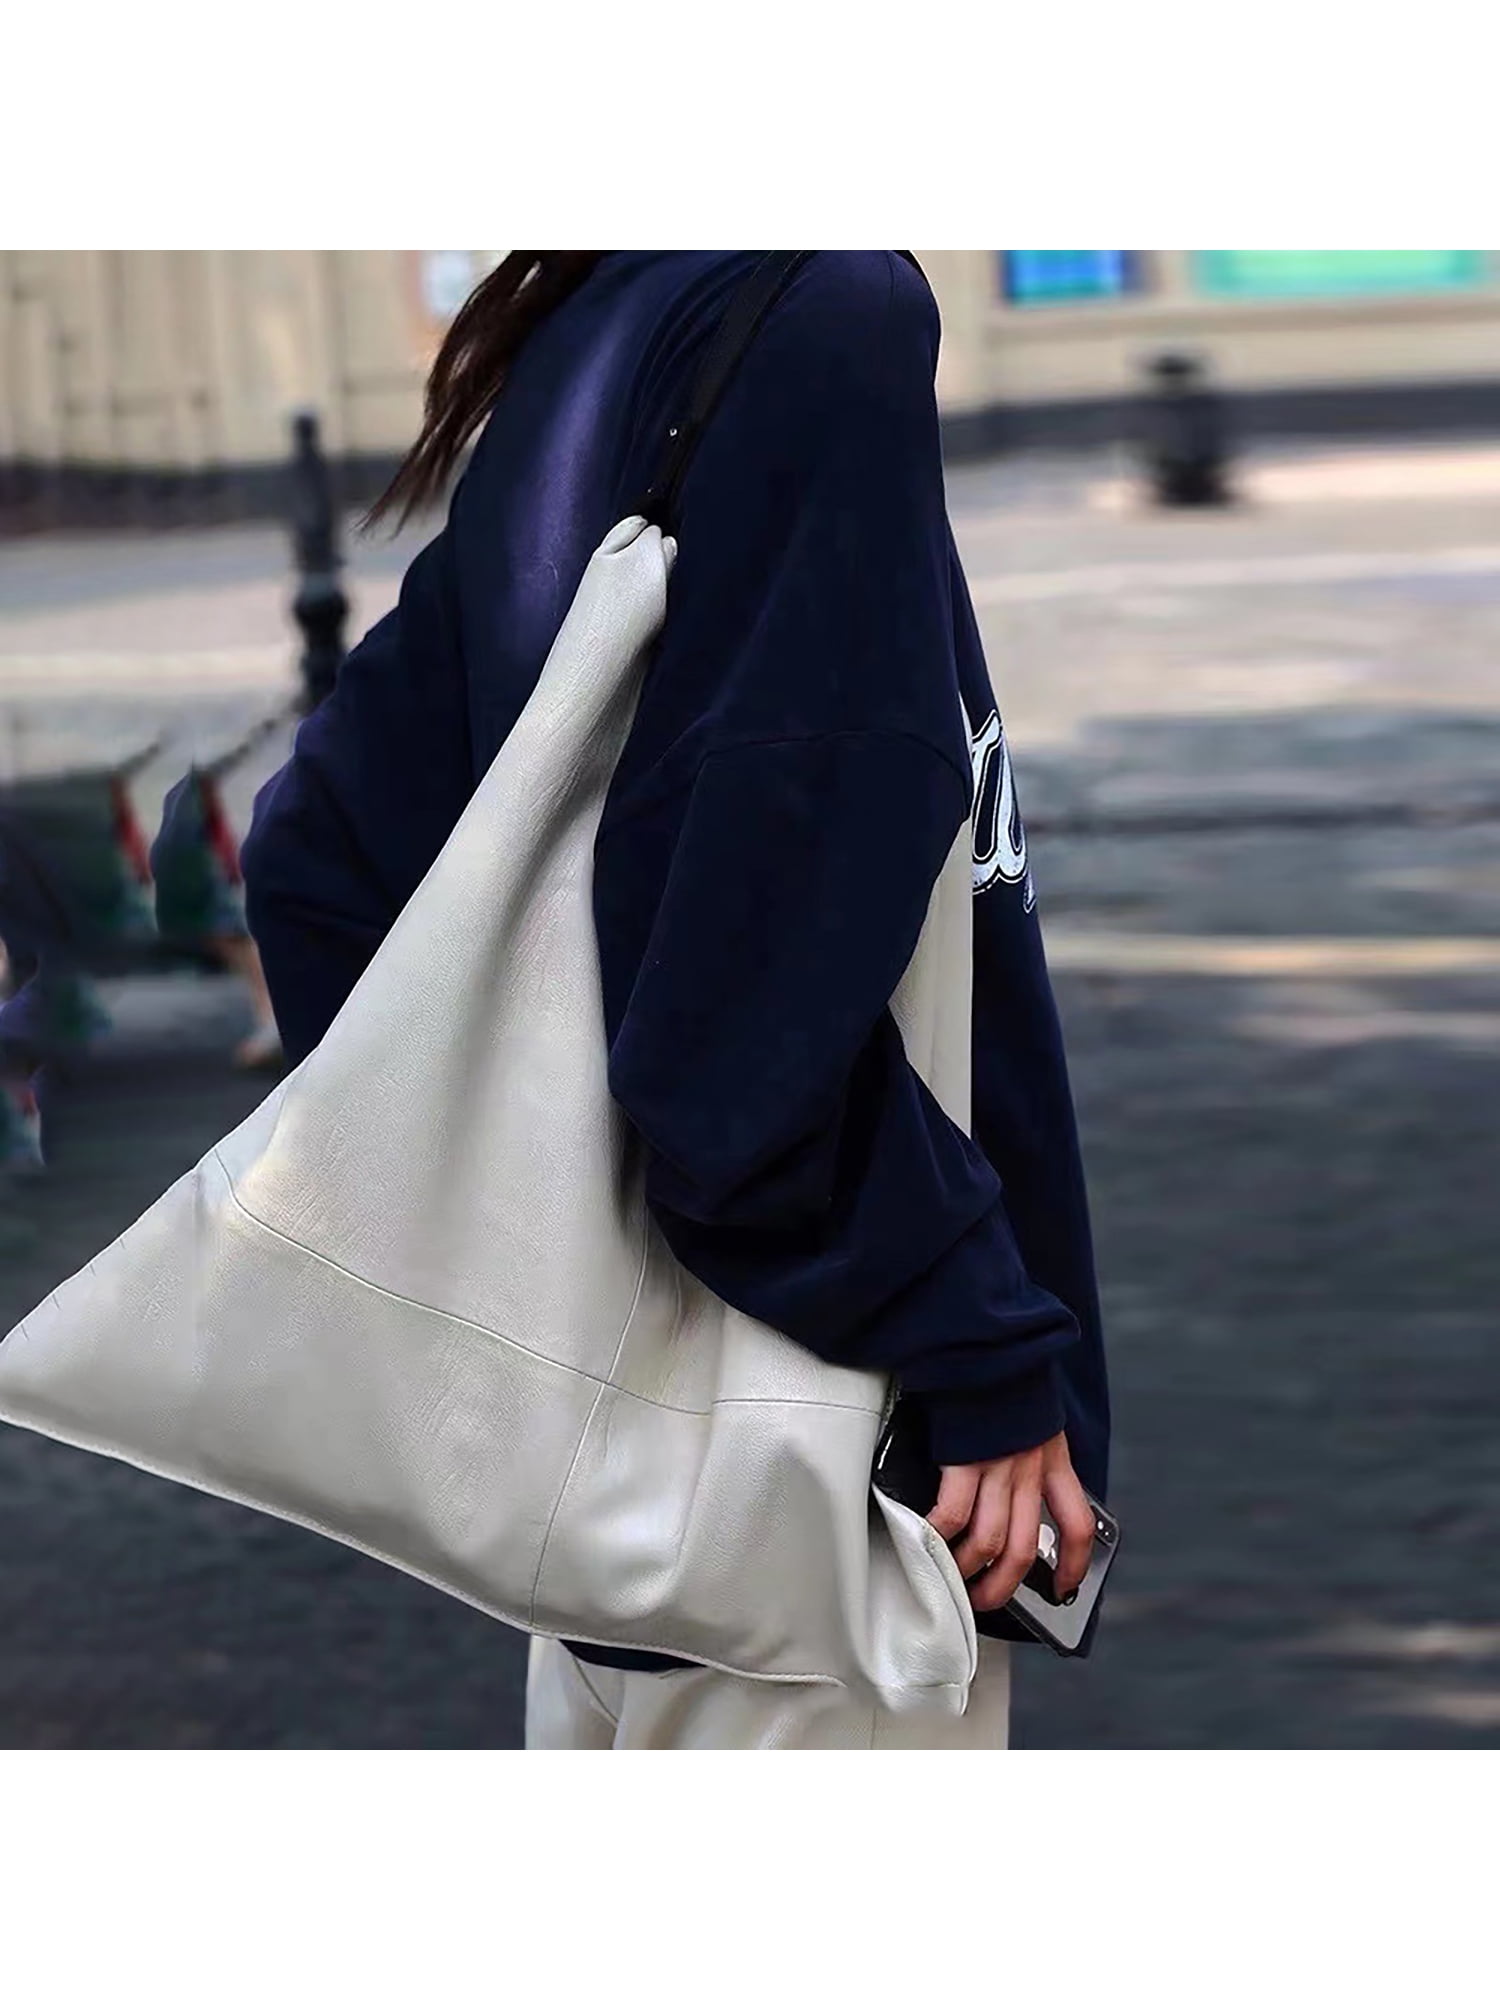 Urban Outfitters Soft Slouchy Tote Bag | Lyst